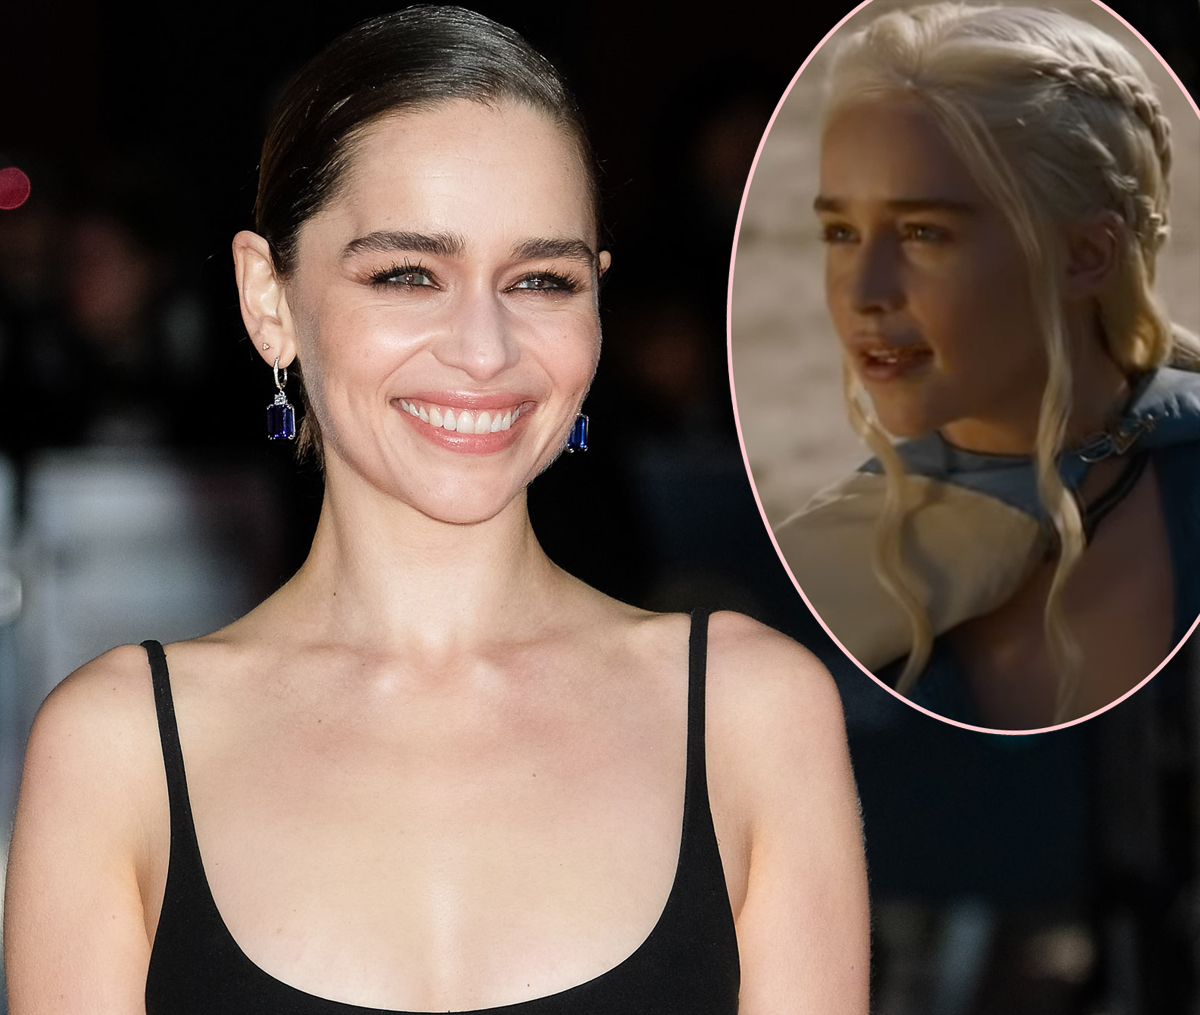 Game Of Thrones Star Emilia Clarke Says Quite A Bit Of Her Brain Is Missing After Life